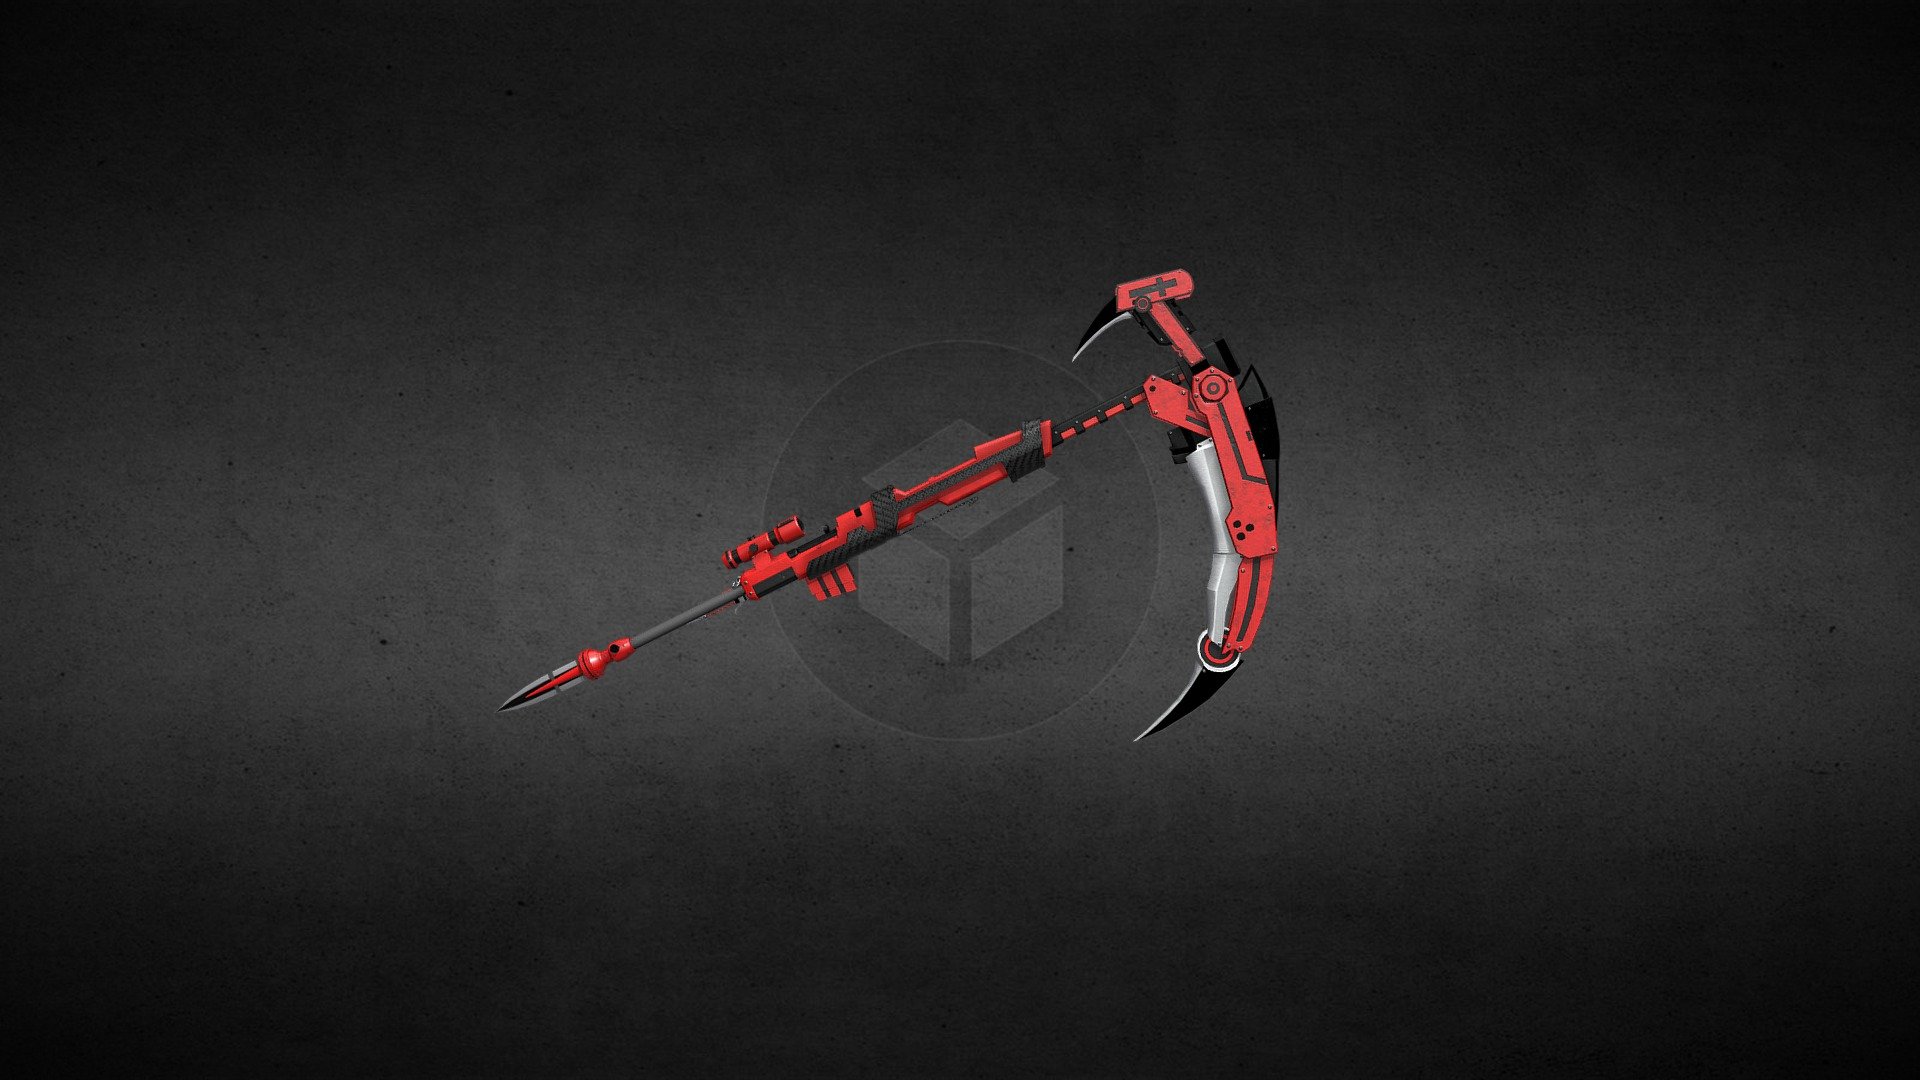 My take on Ruby Roses’ Crescent Rose from the Rooster Teeth production RWBY if it were in a more realistic style and some artistic chnages. “Participant of CGTrader Awards”

This is not endorsed by Rooster Teeth in any way.  Views, opinions, thoughts are all my own.  Rooster Teeth and [name of Rooster Teeth show/character/etc.] are trade names or registered trademarks of Rooster Teeth Productions, LLC.  © Rooster Teeth Productions, LLC 3d model